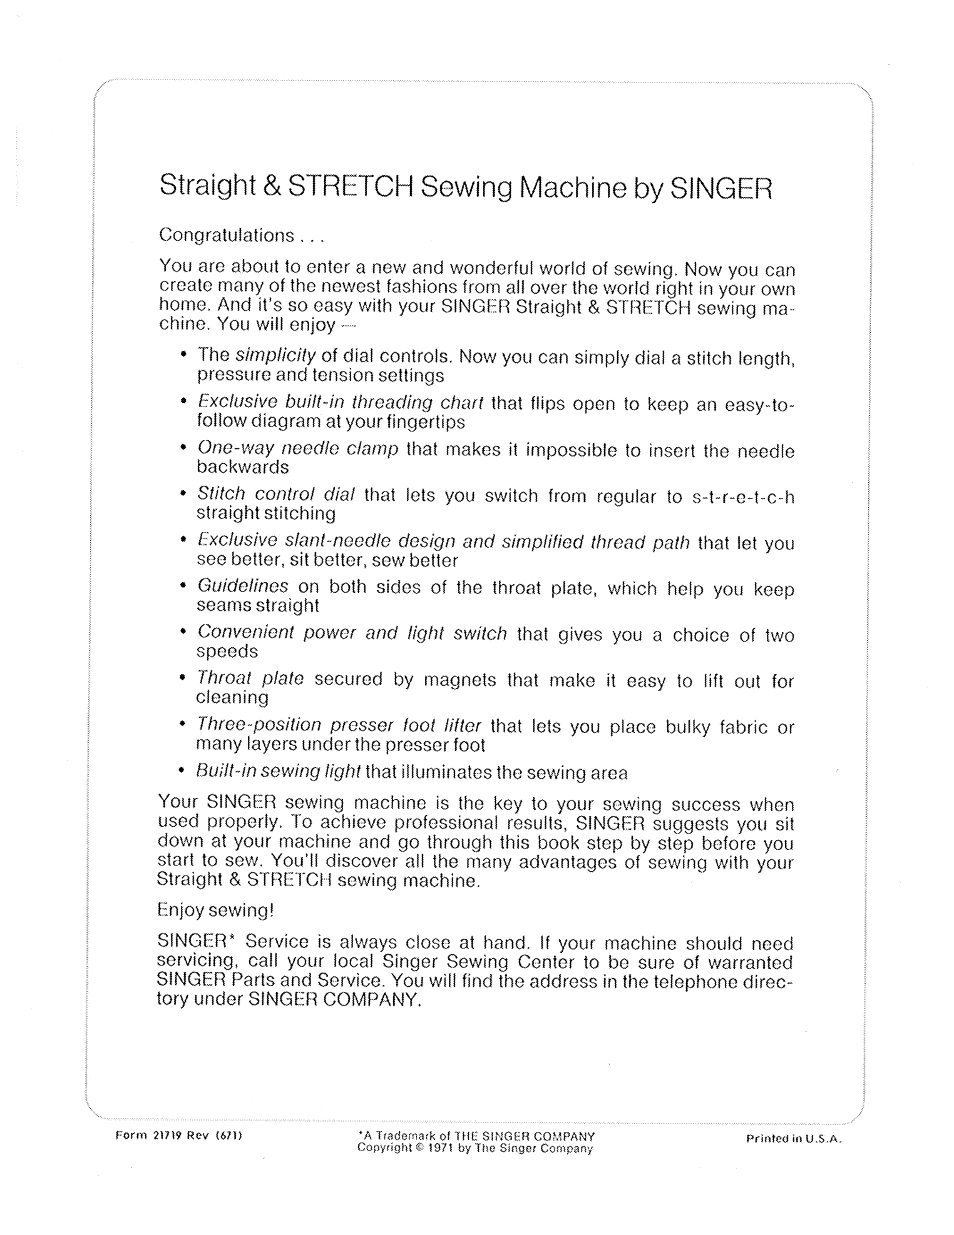 Straight & stretch sewing machine by singer | SINGER 719 User Manual | Page 2 / 36